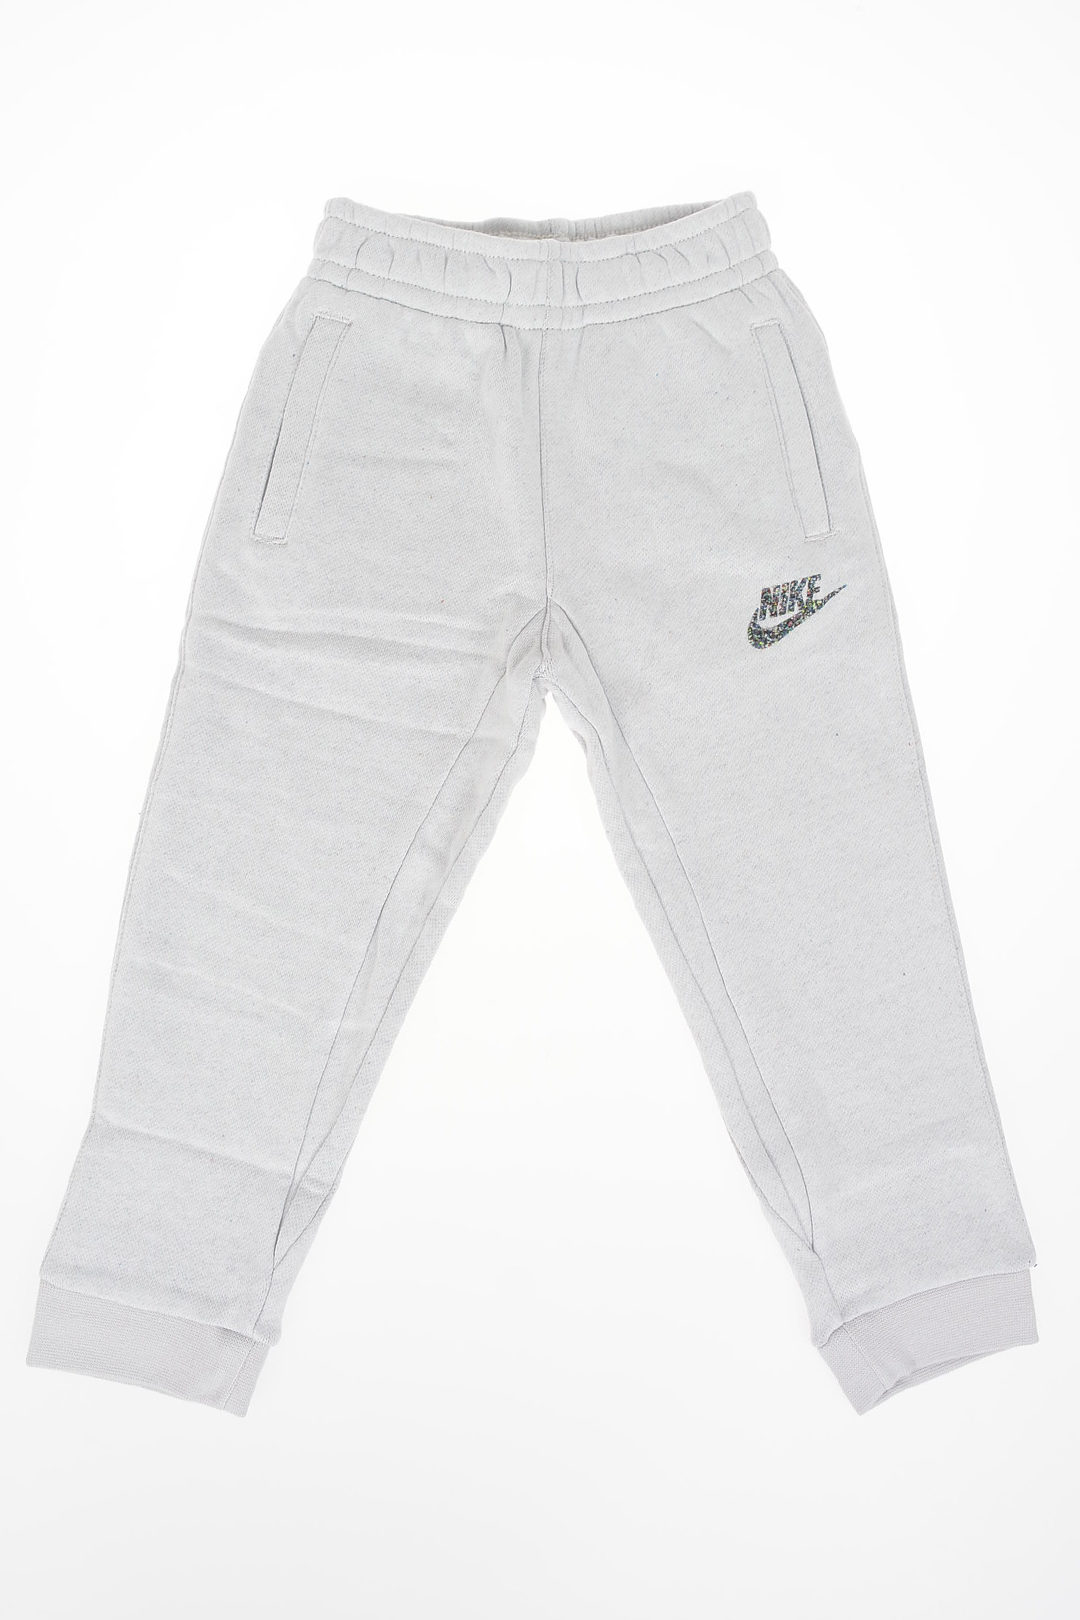 mens nike air tracksuit bottoms